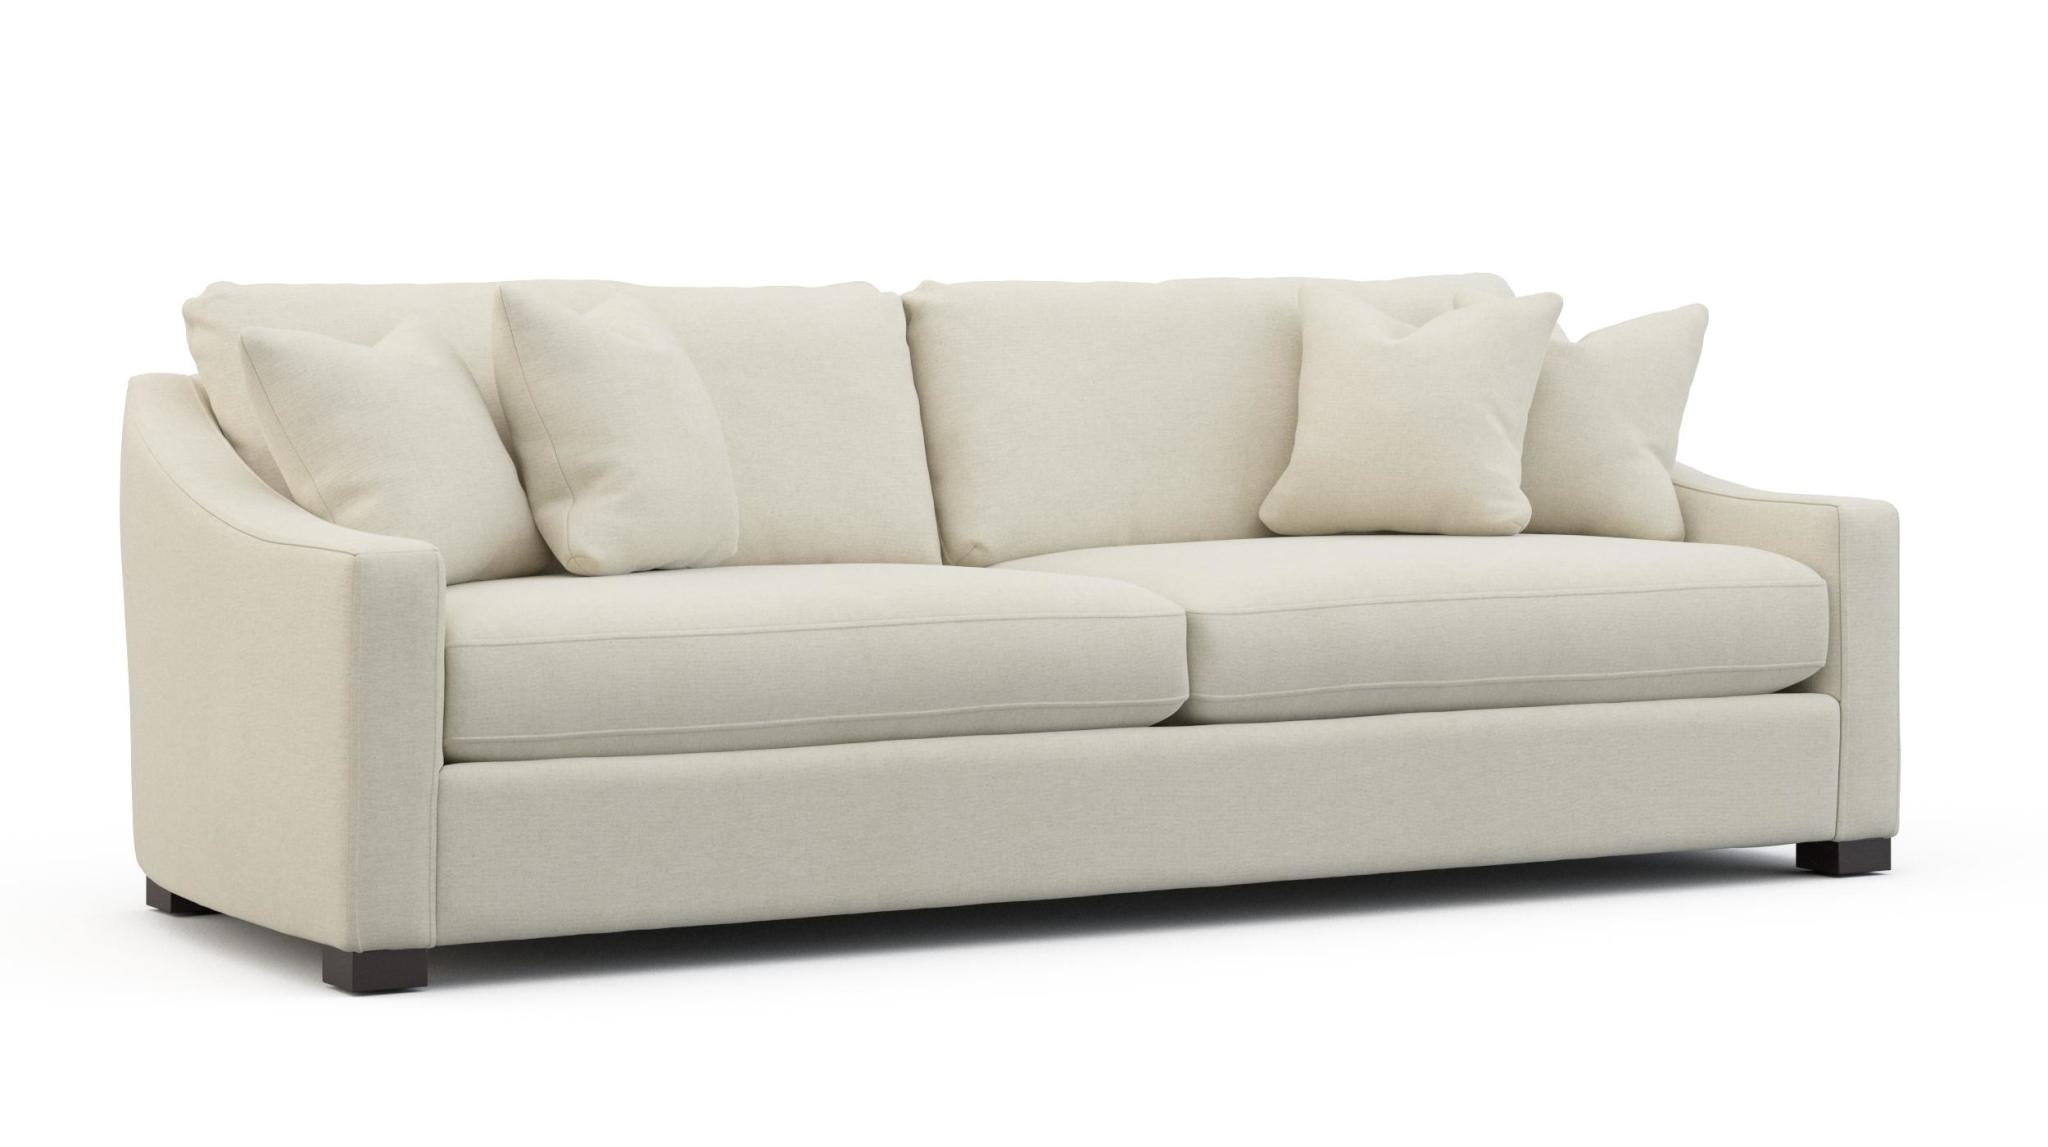 Precedent - Hilton Sofa 33 x 80 x 25 Customizable, Furniture Available for Local Delivery or Pick Up